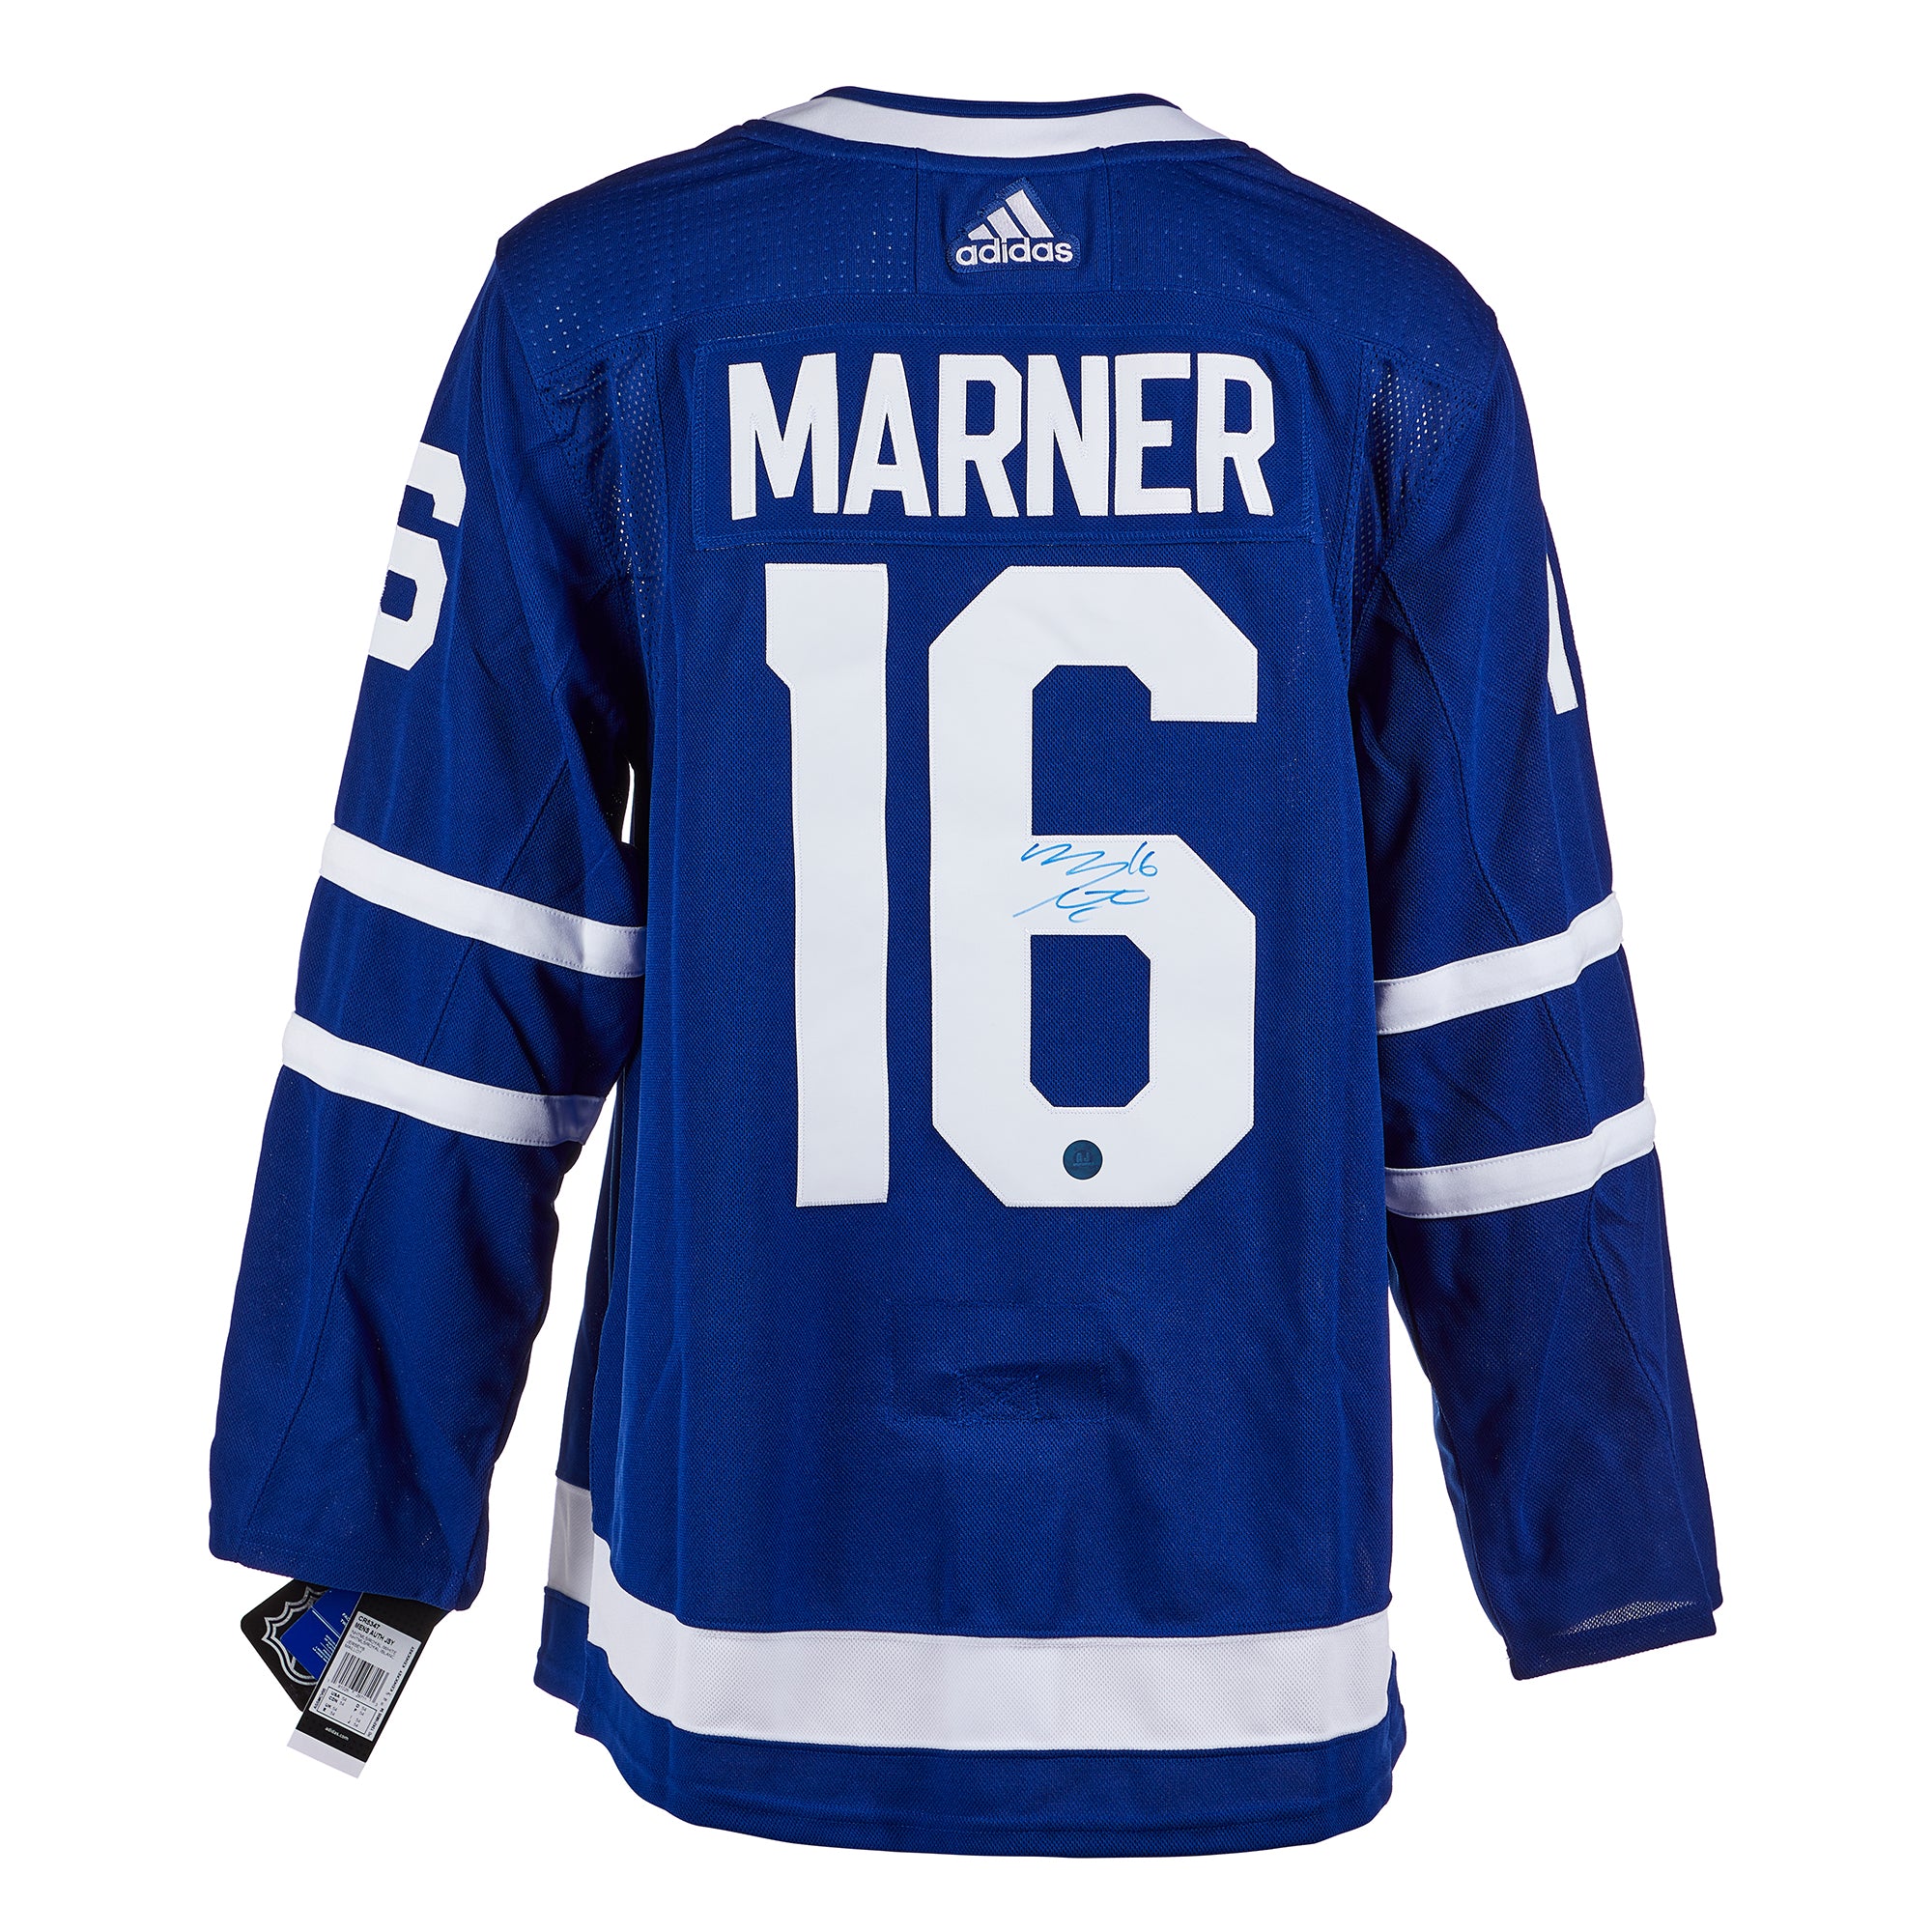 Autographed Mitch Marner Jersey - St Pats Heritage Adidas